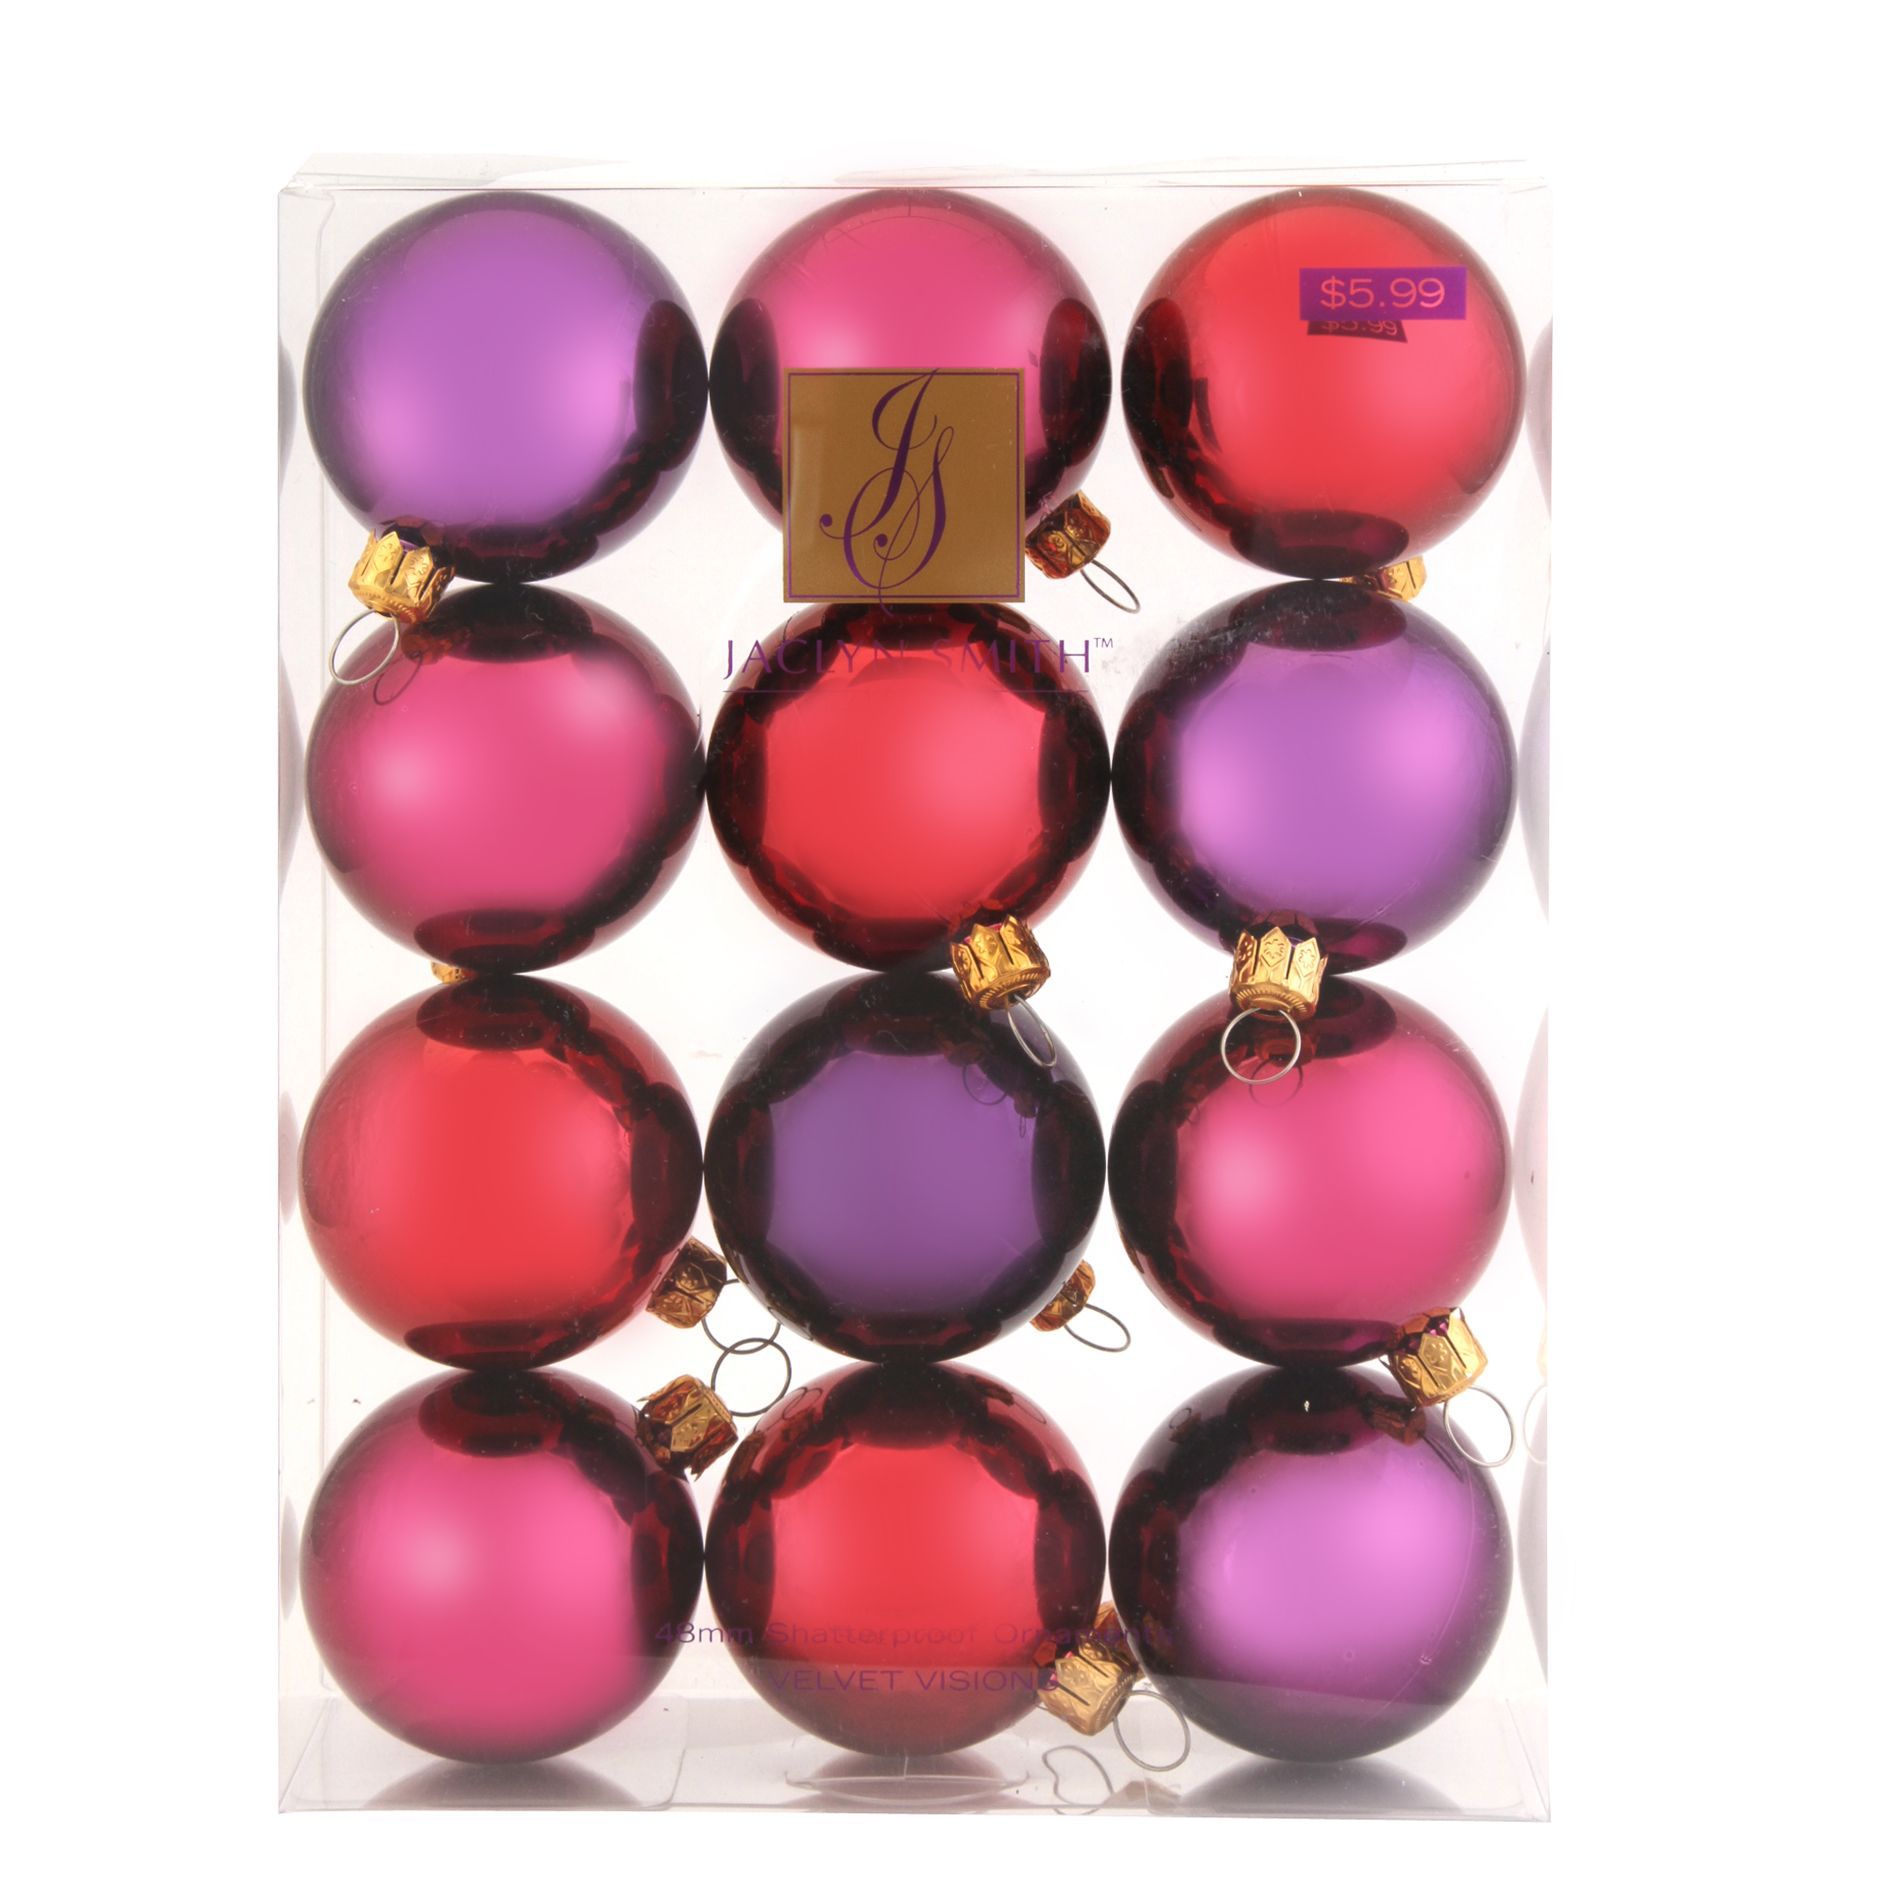 Jaclyn Smith Velvet Visions 12-Pc 48mm Shatterproof Round Ornaments